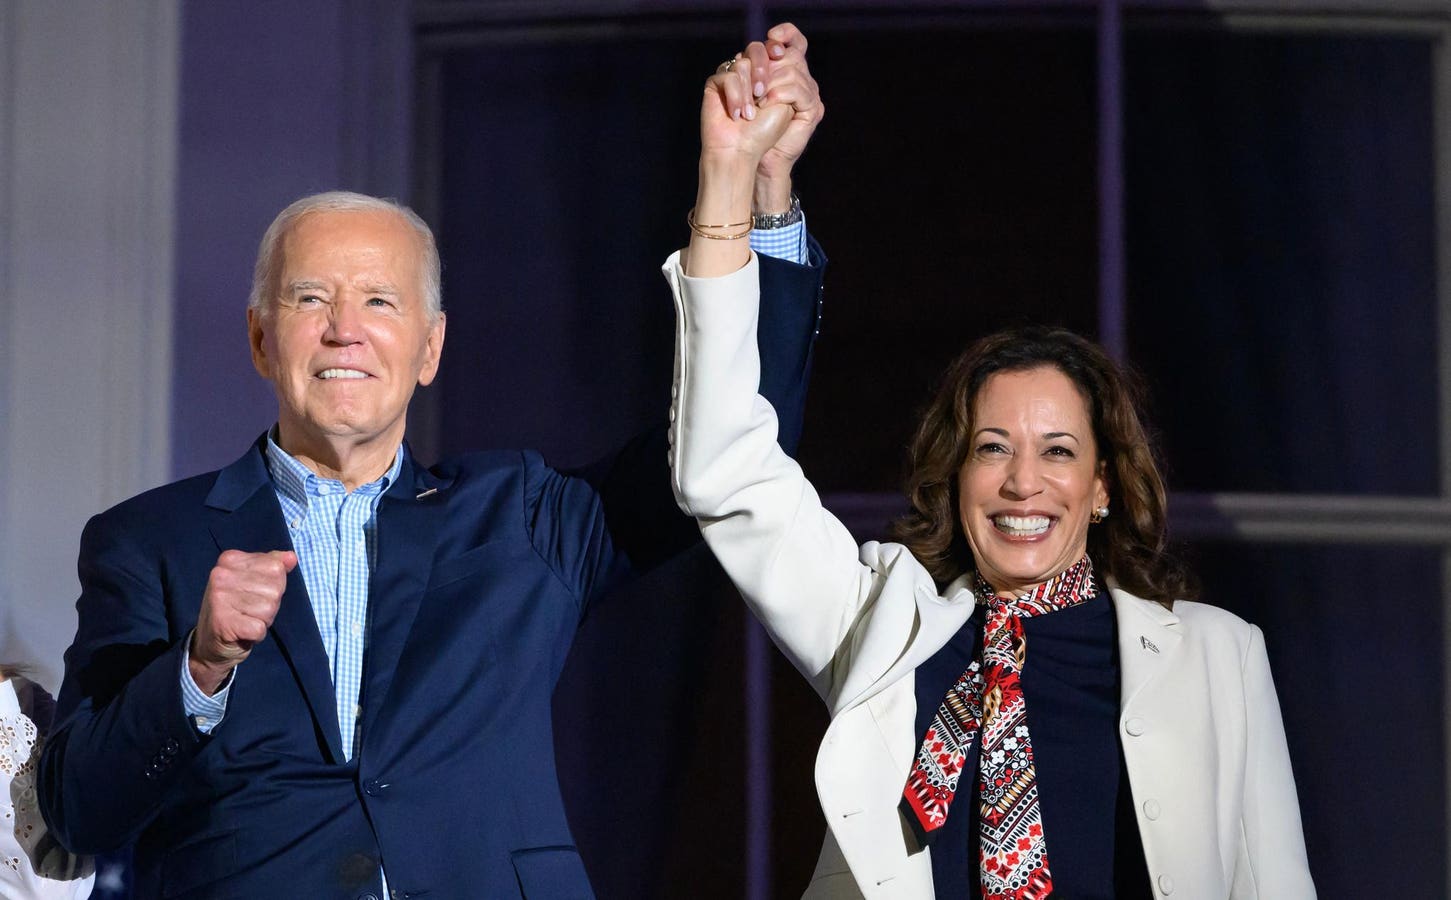 Kamala Harris As Biden Replacement Grows More Likely As He Reportedly Weighs Dropping Out—Here’s What To Know About Her Record